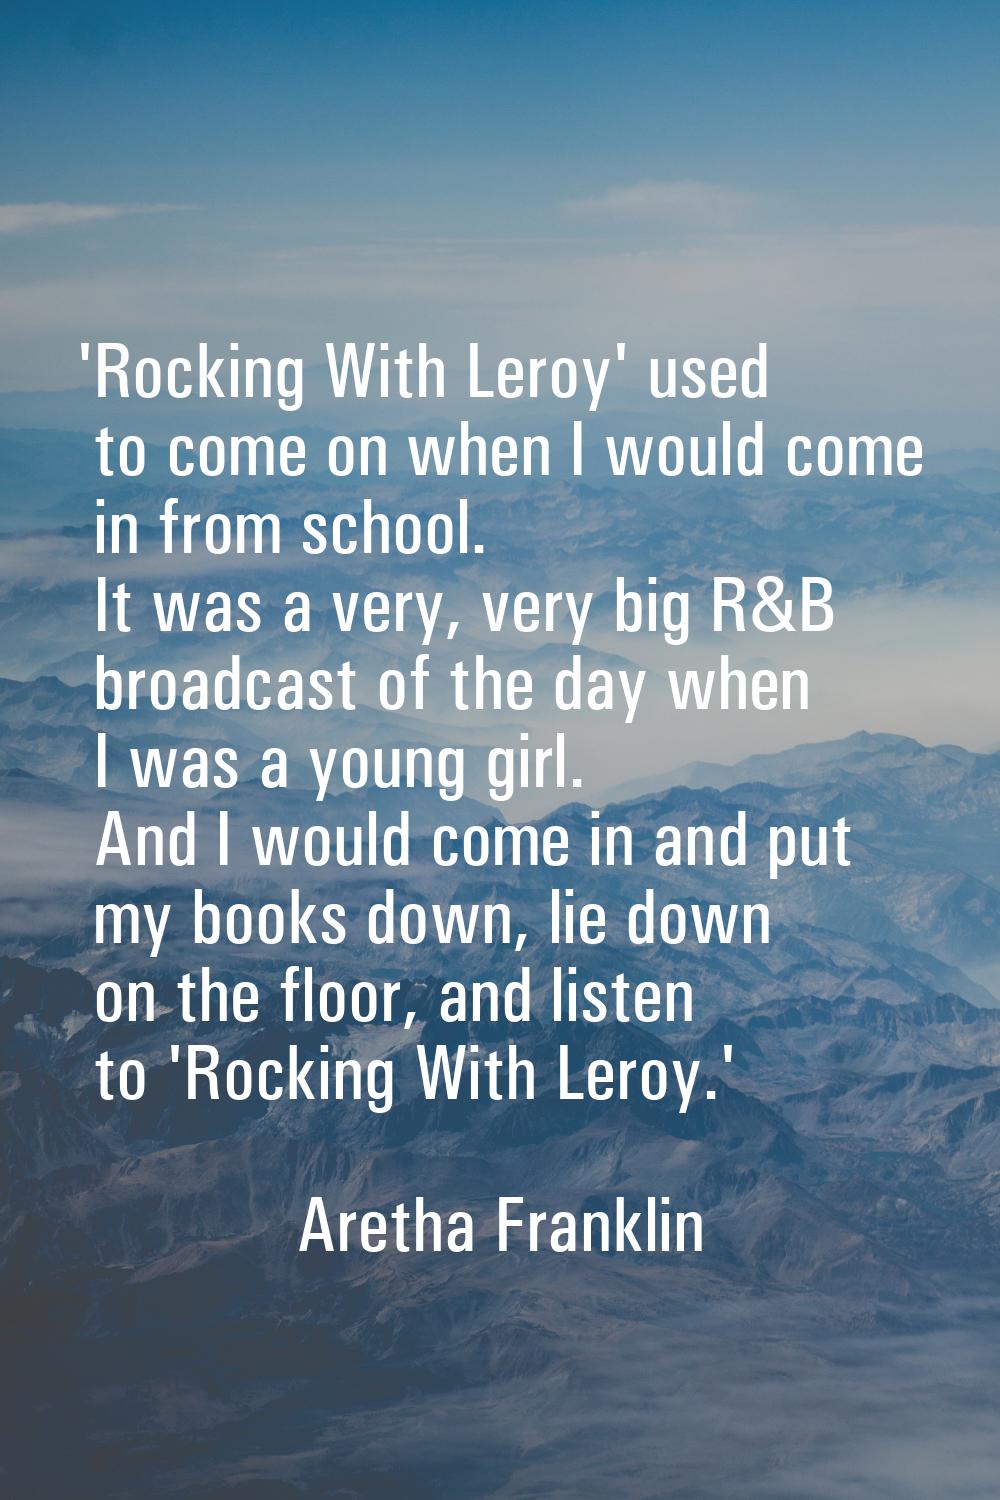 'Rocking With Leroy' used to come on when I would come in from school. It was a very, very big R&B 